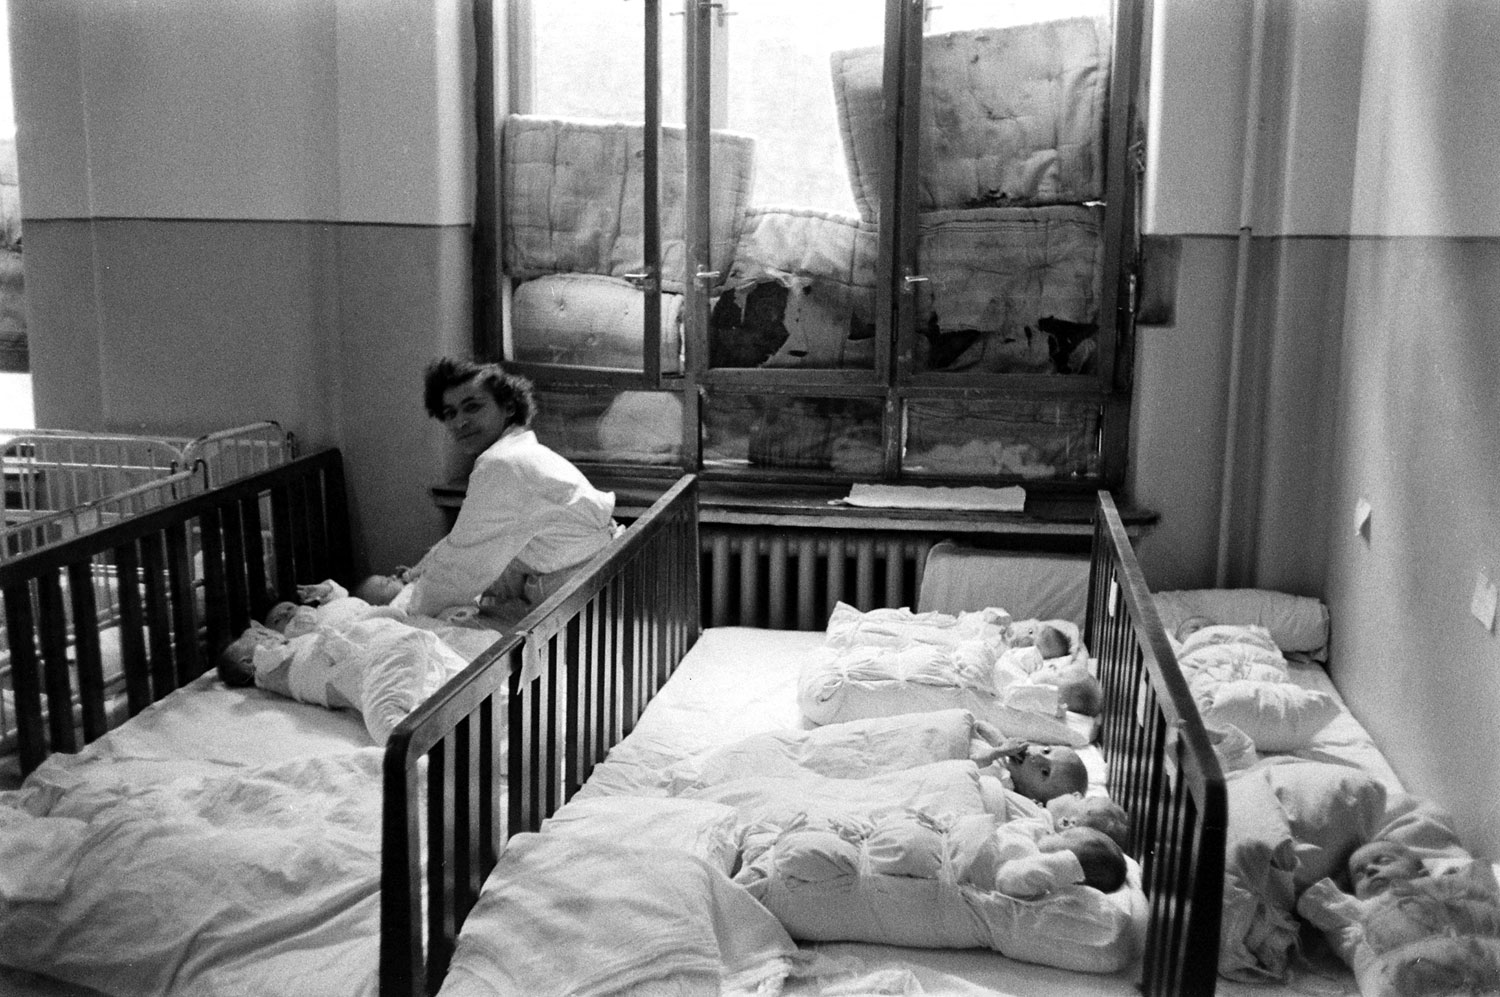 Scene in a hospital during the Hungarian Revolution, 1956.